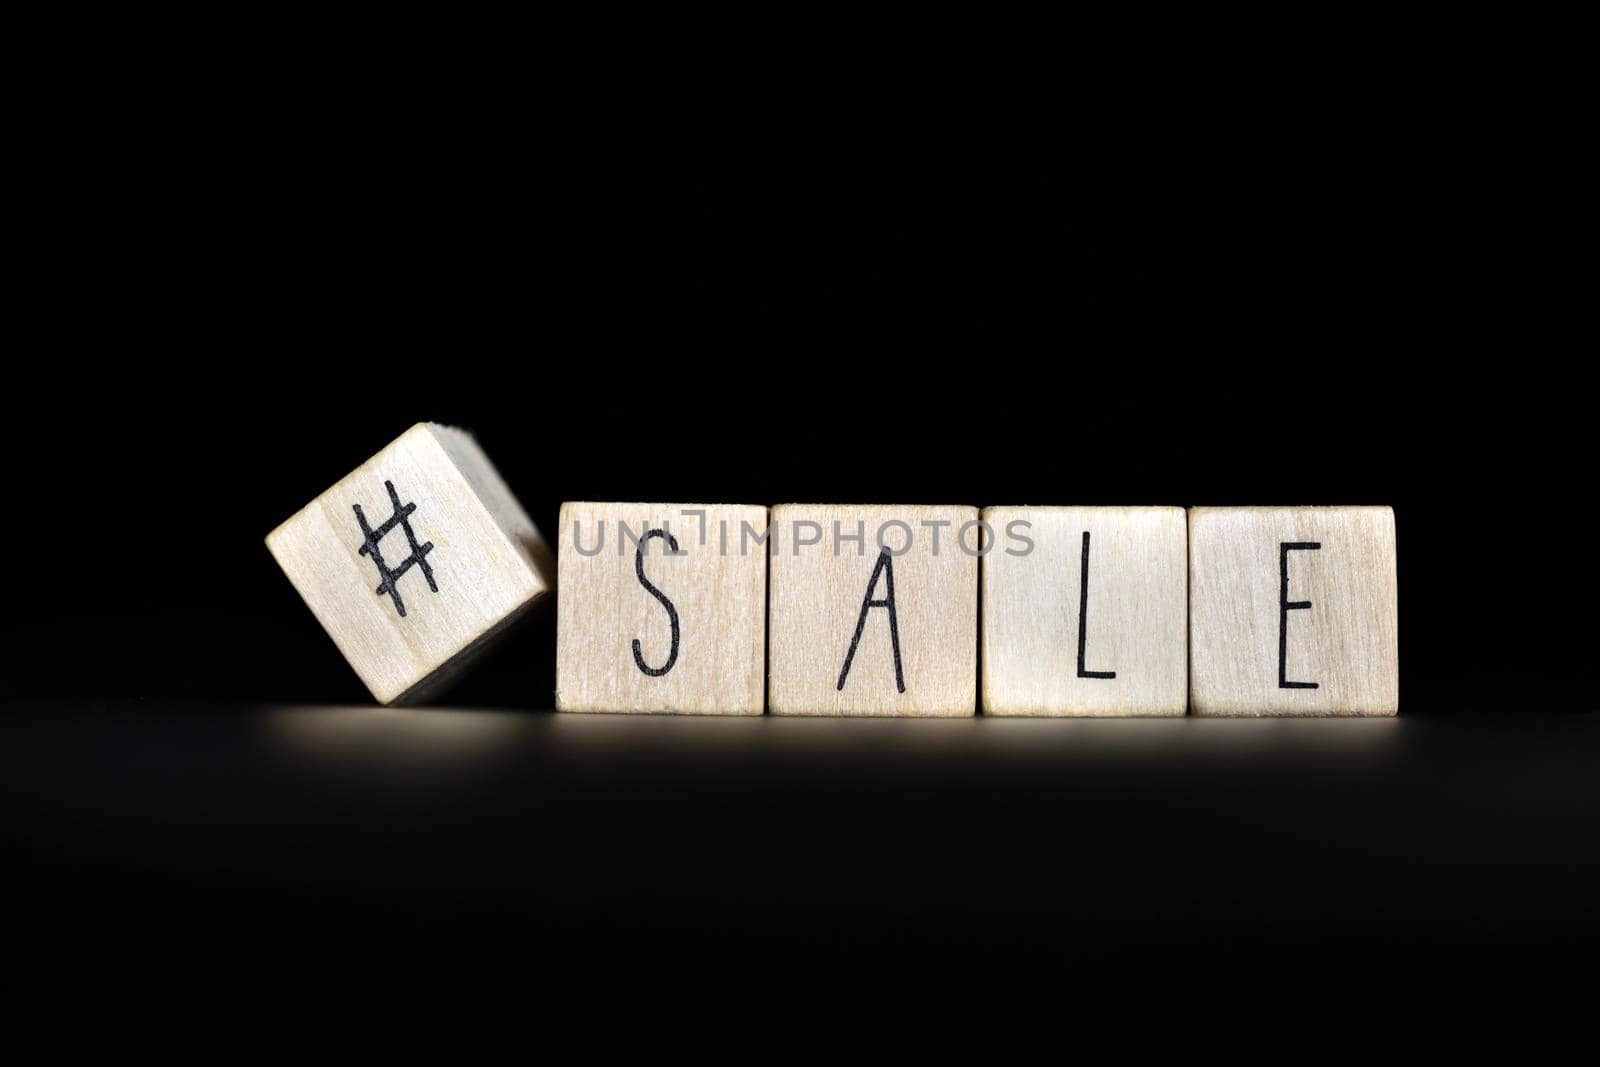 Hashtag and sale written on a black background with space for text. Concept of selling products online store, social media on Black by Annebel146